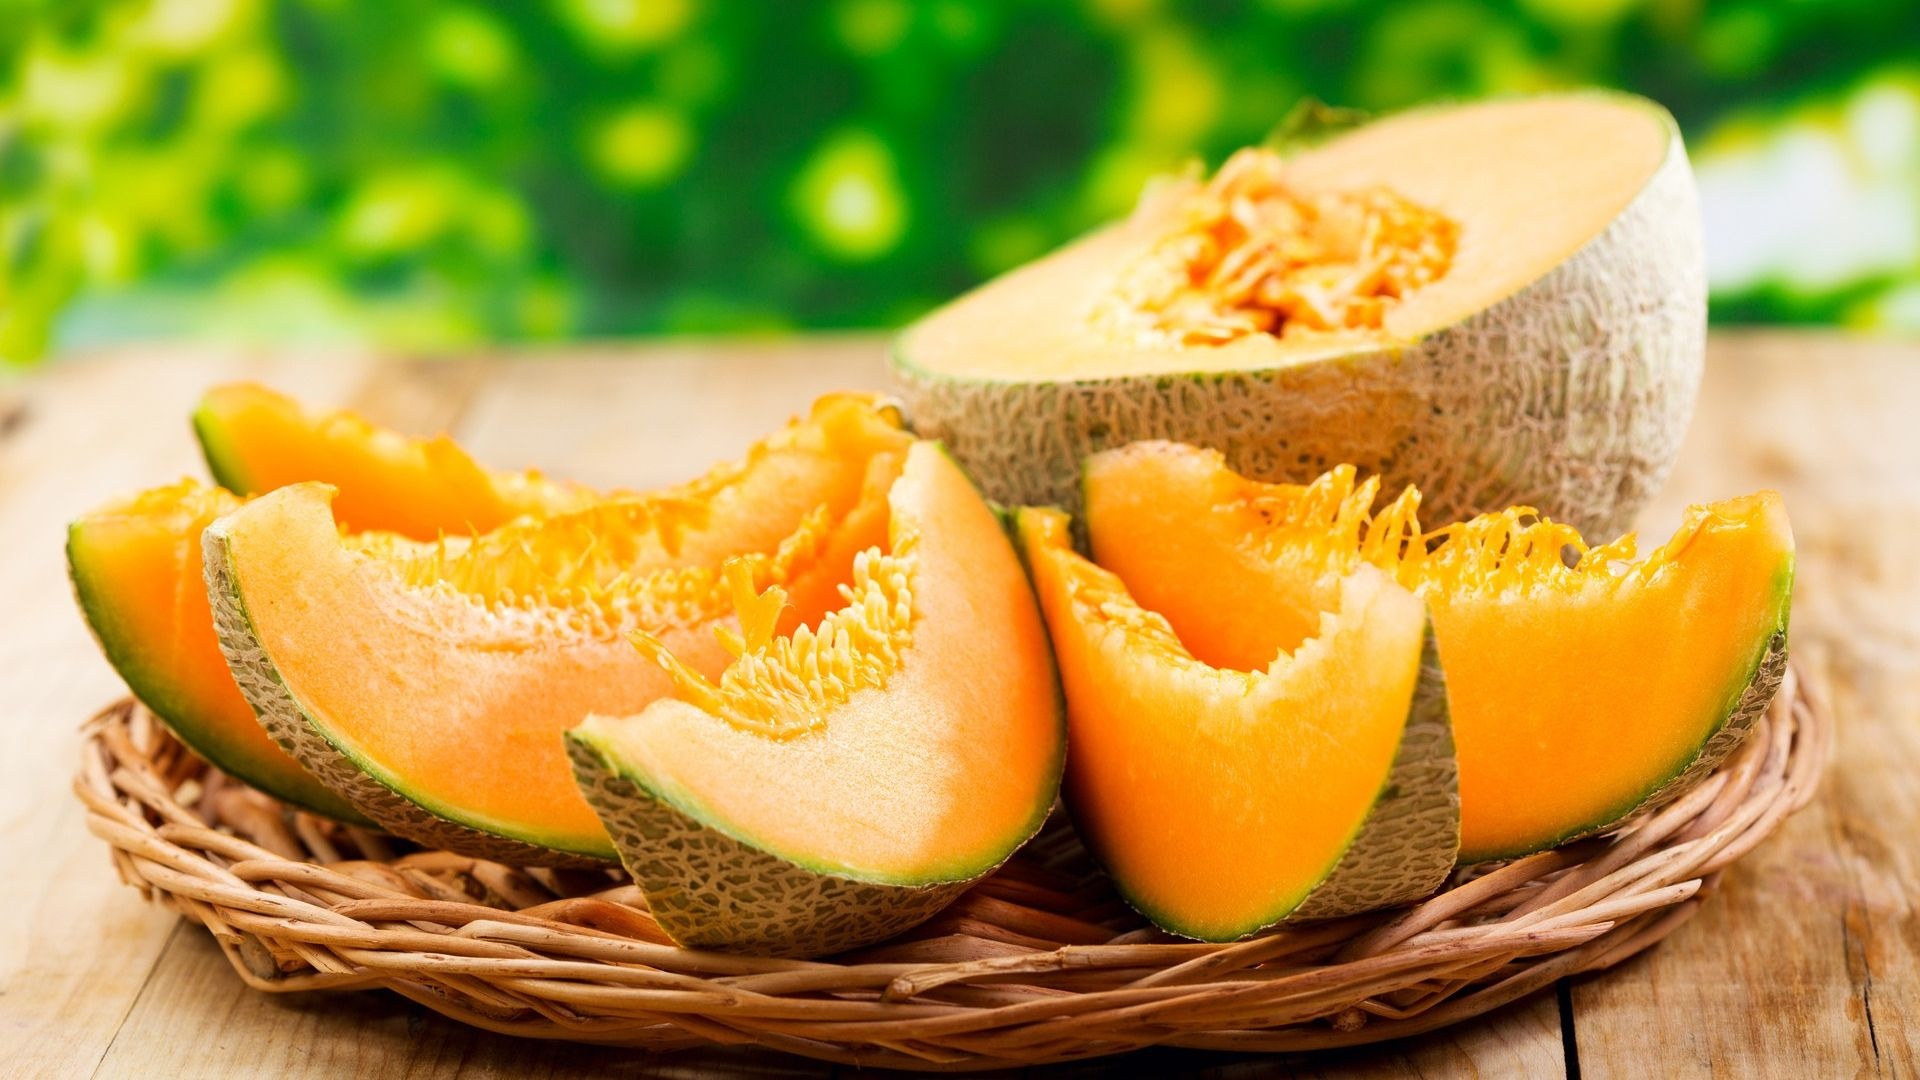 Melon: A yellow-coloured fruit with tempting sweetness and a pleasant aroma. 1920x1080 Full HD Background.